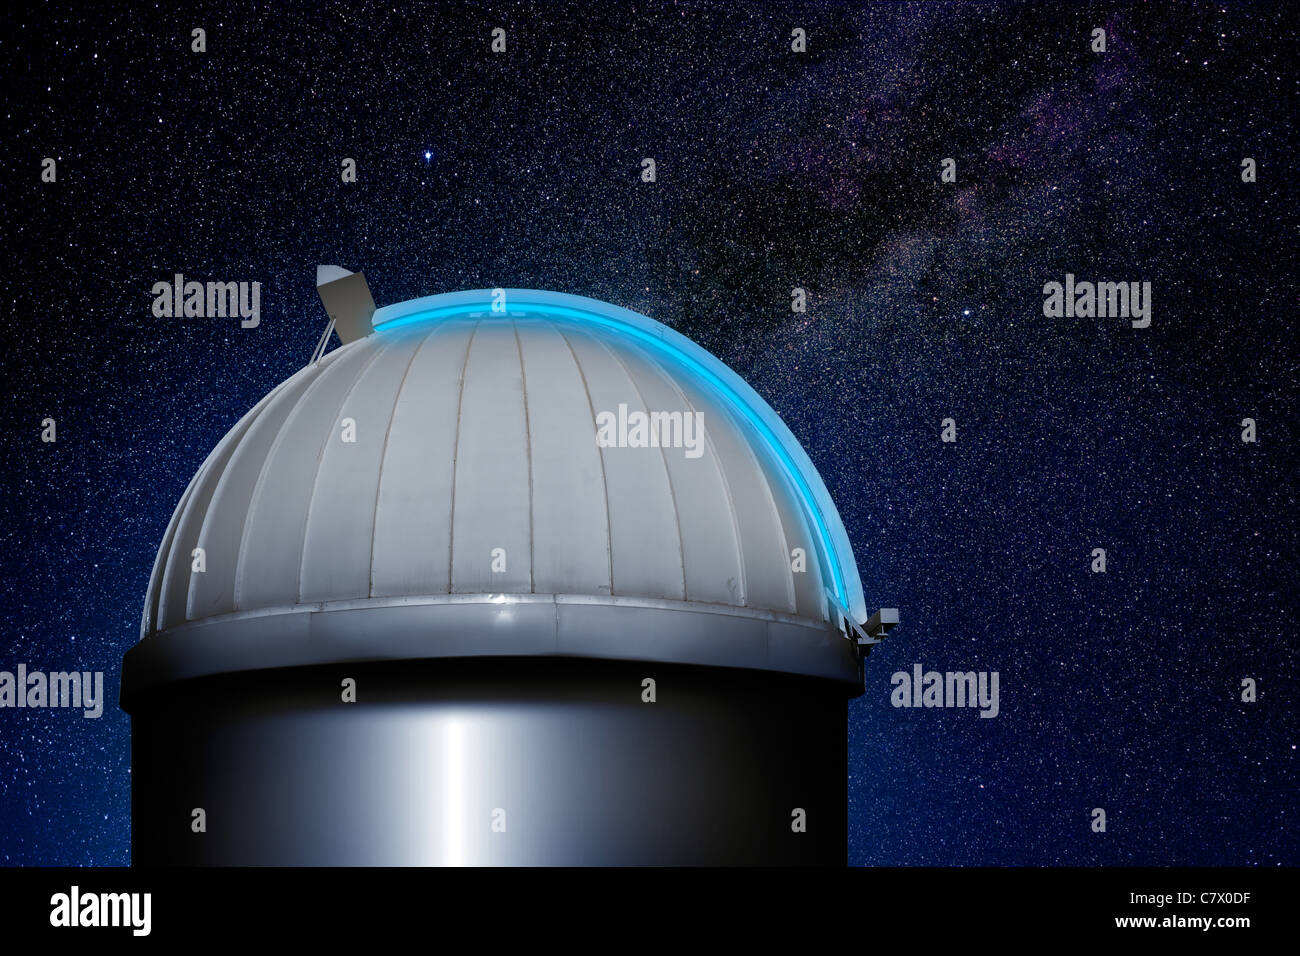 astronomical observatory dome in stars sky night Stock Photo